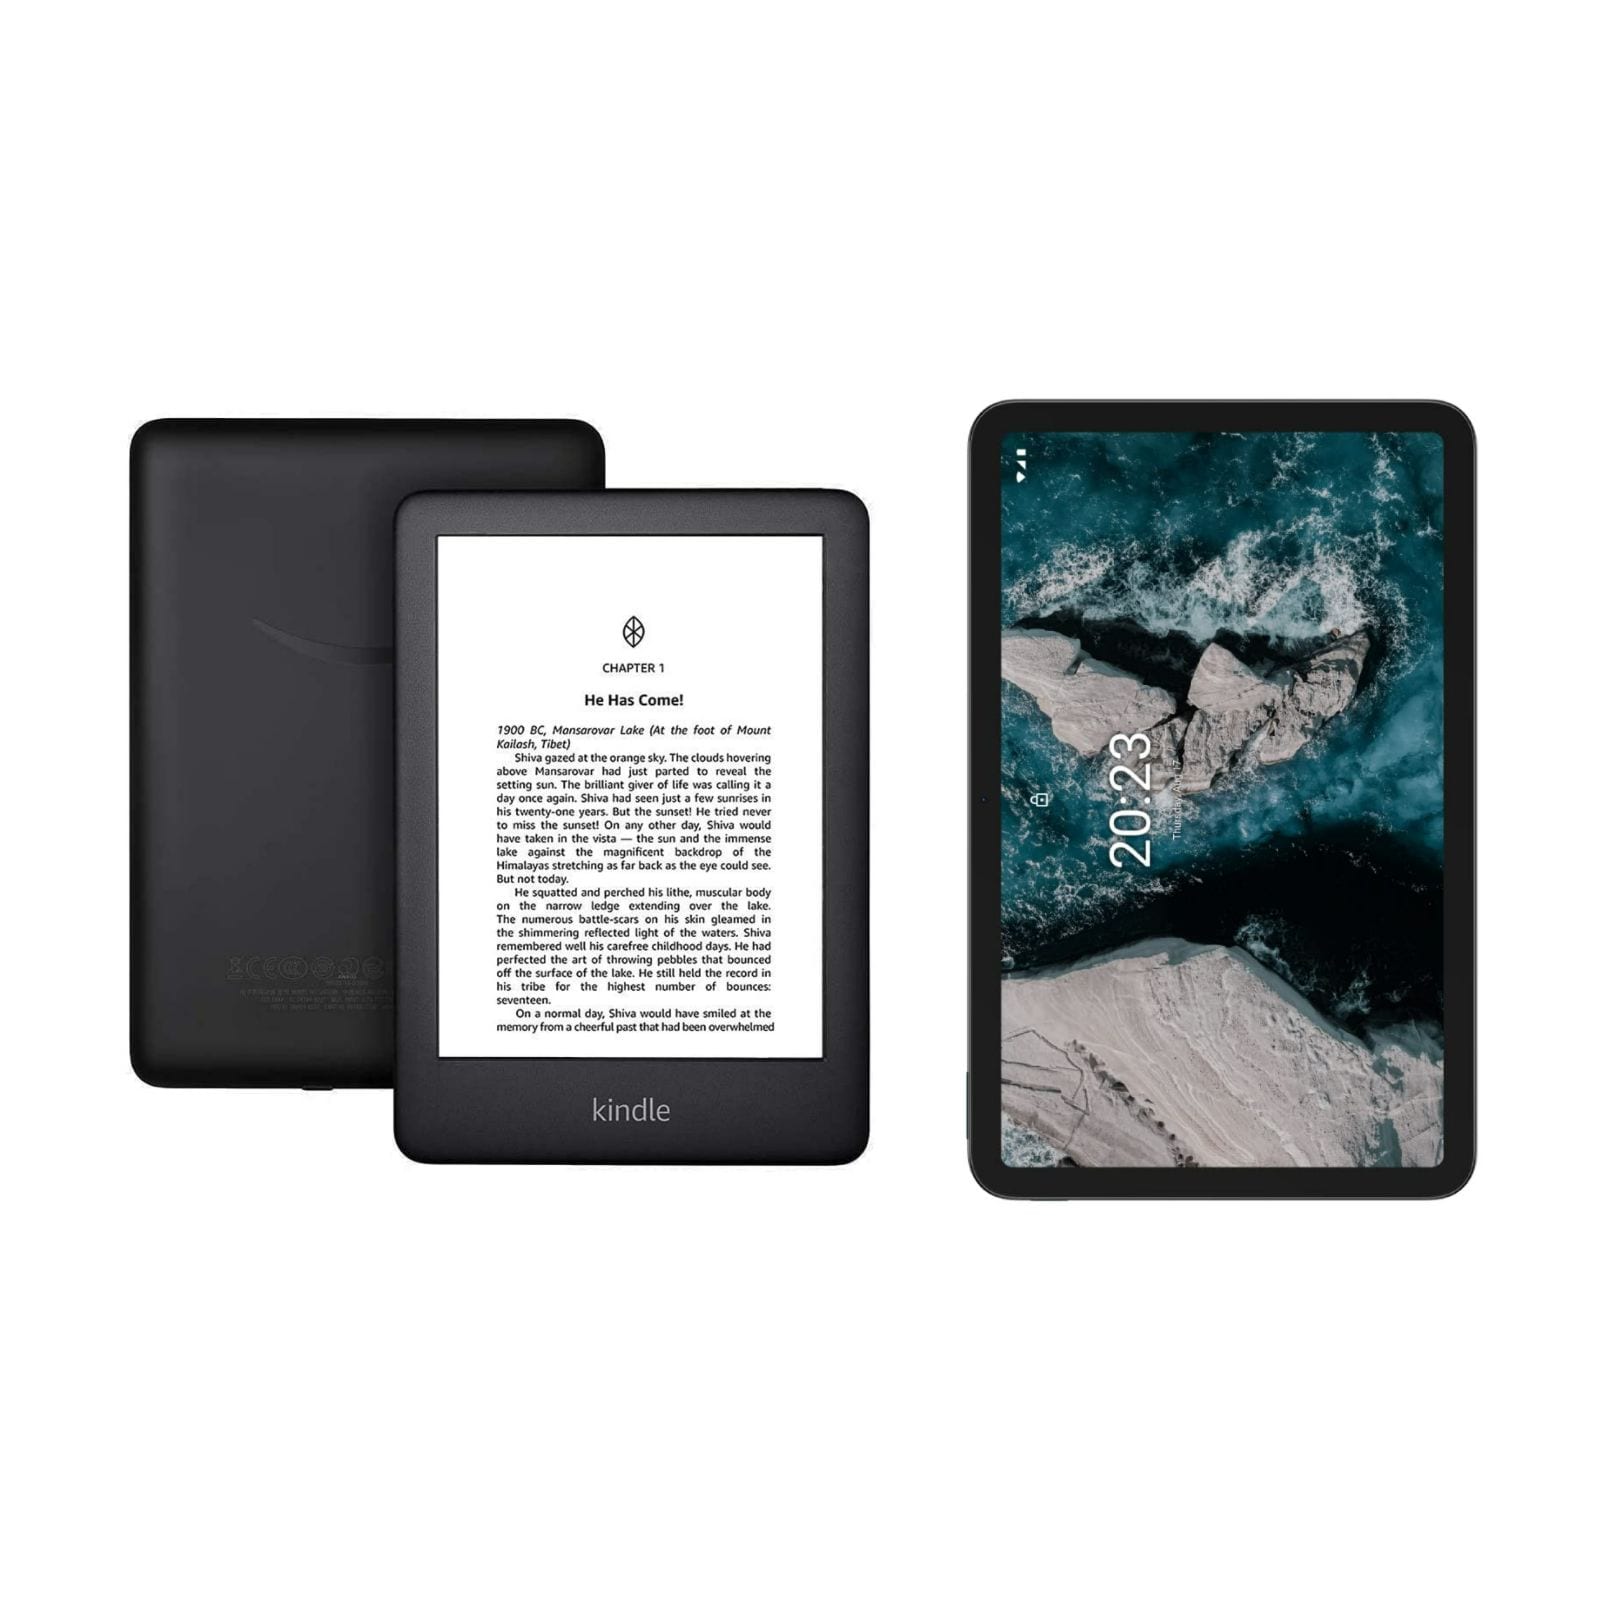 Amazon Kindle E-Readers vs Android Tablets: What's Different